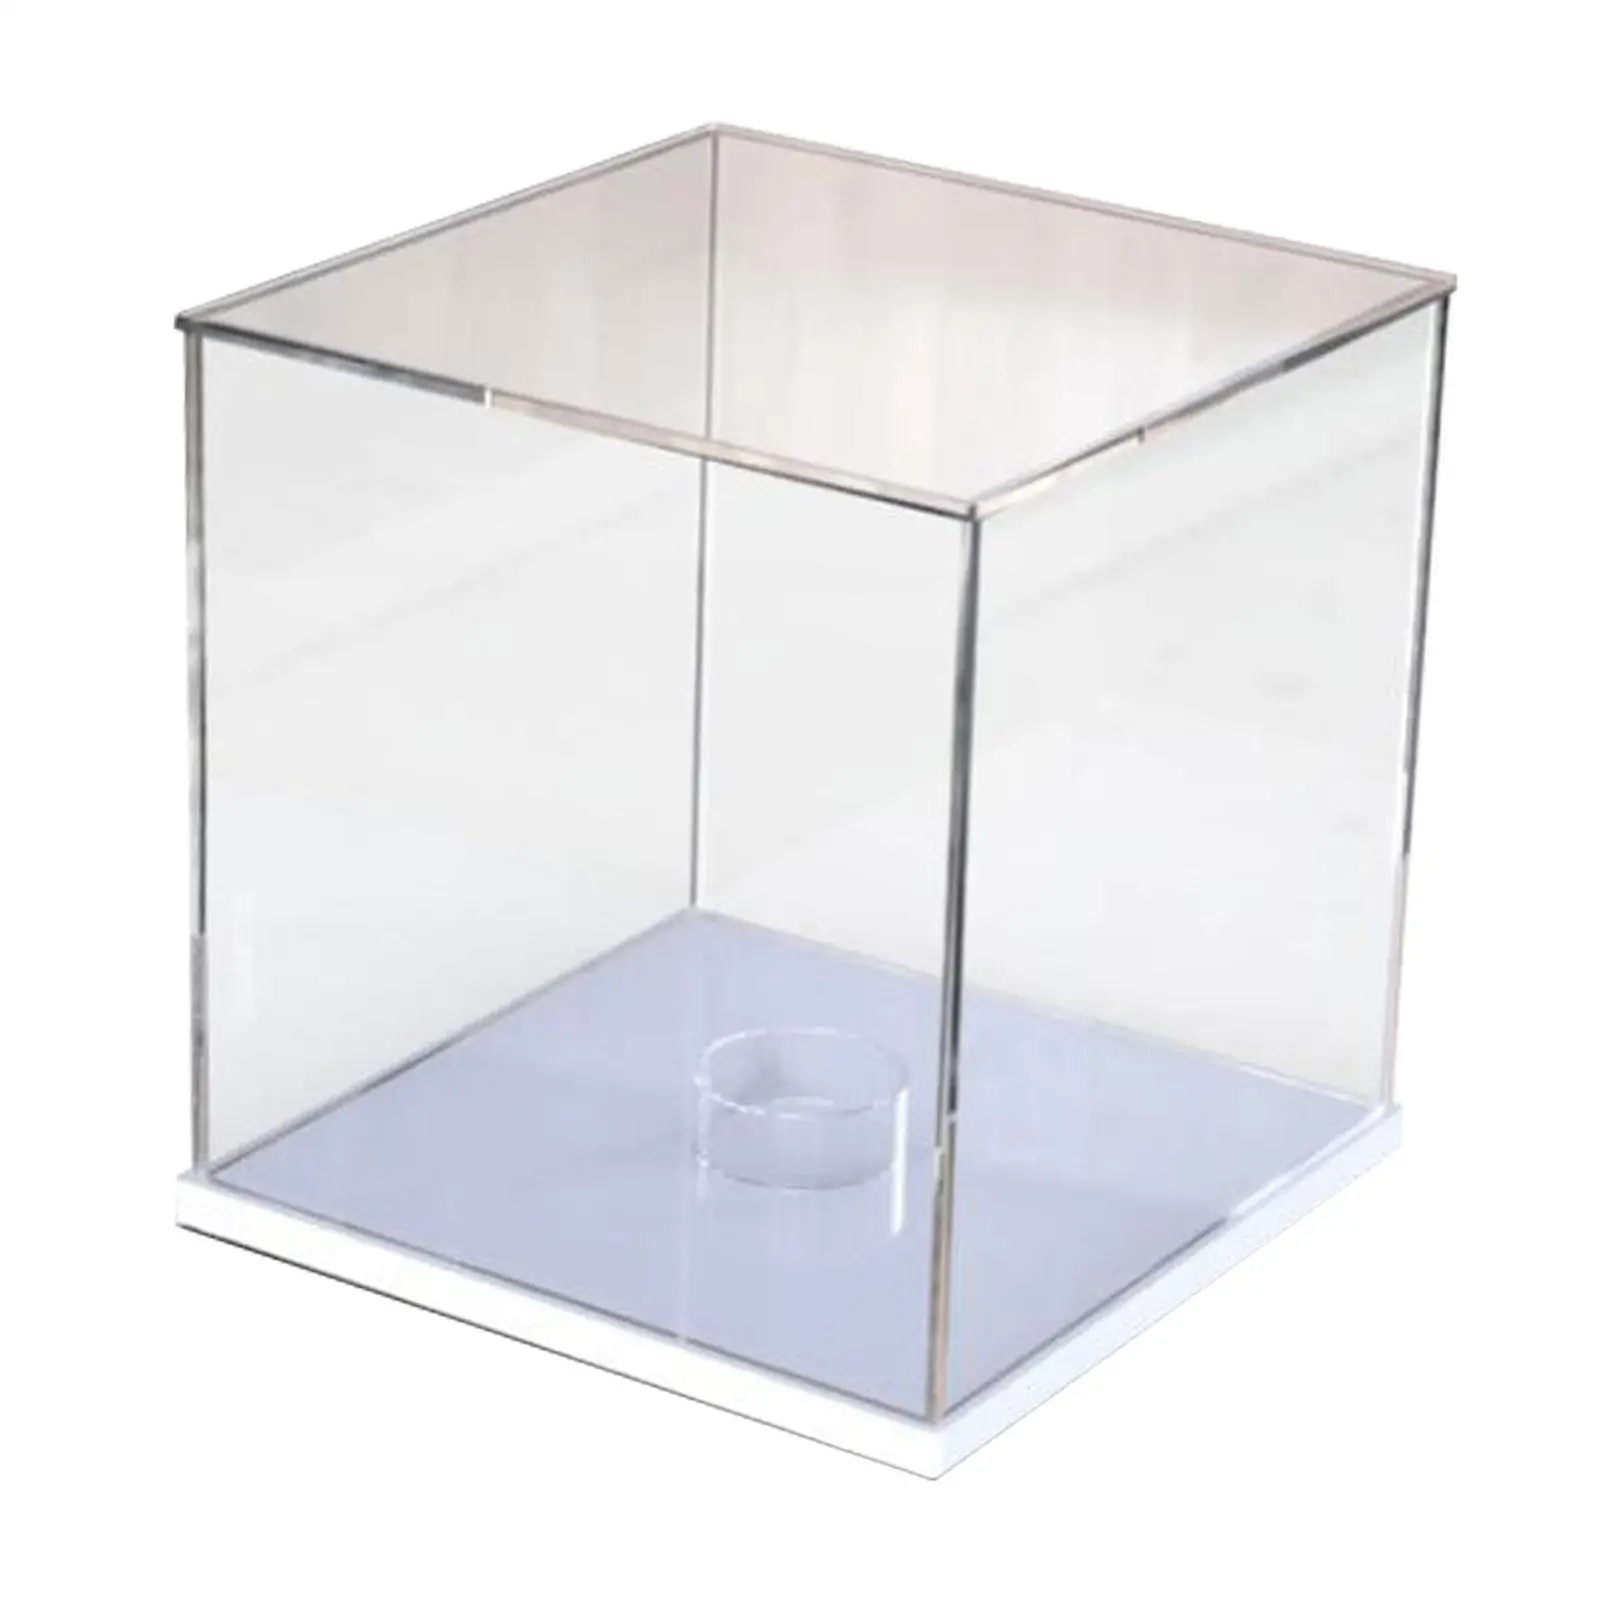 Basketball Display Case with Stand, Clear Acrylic Full Size Basketball Display